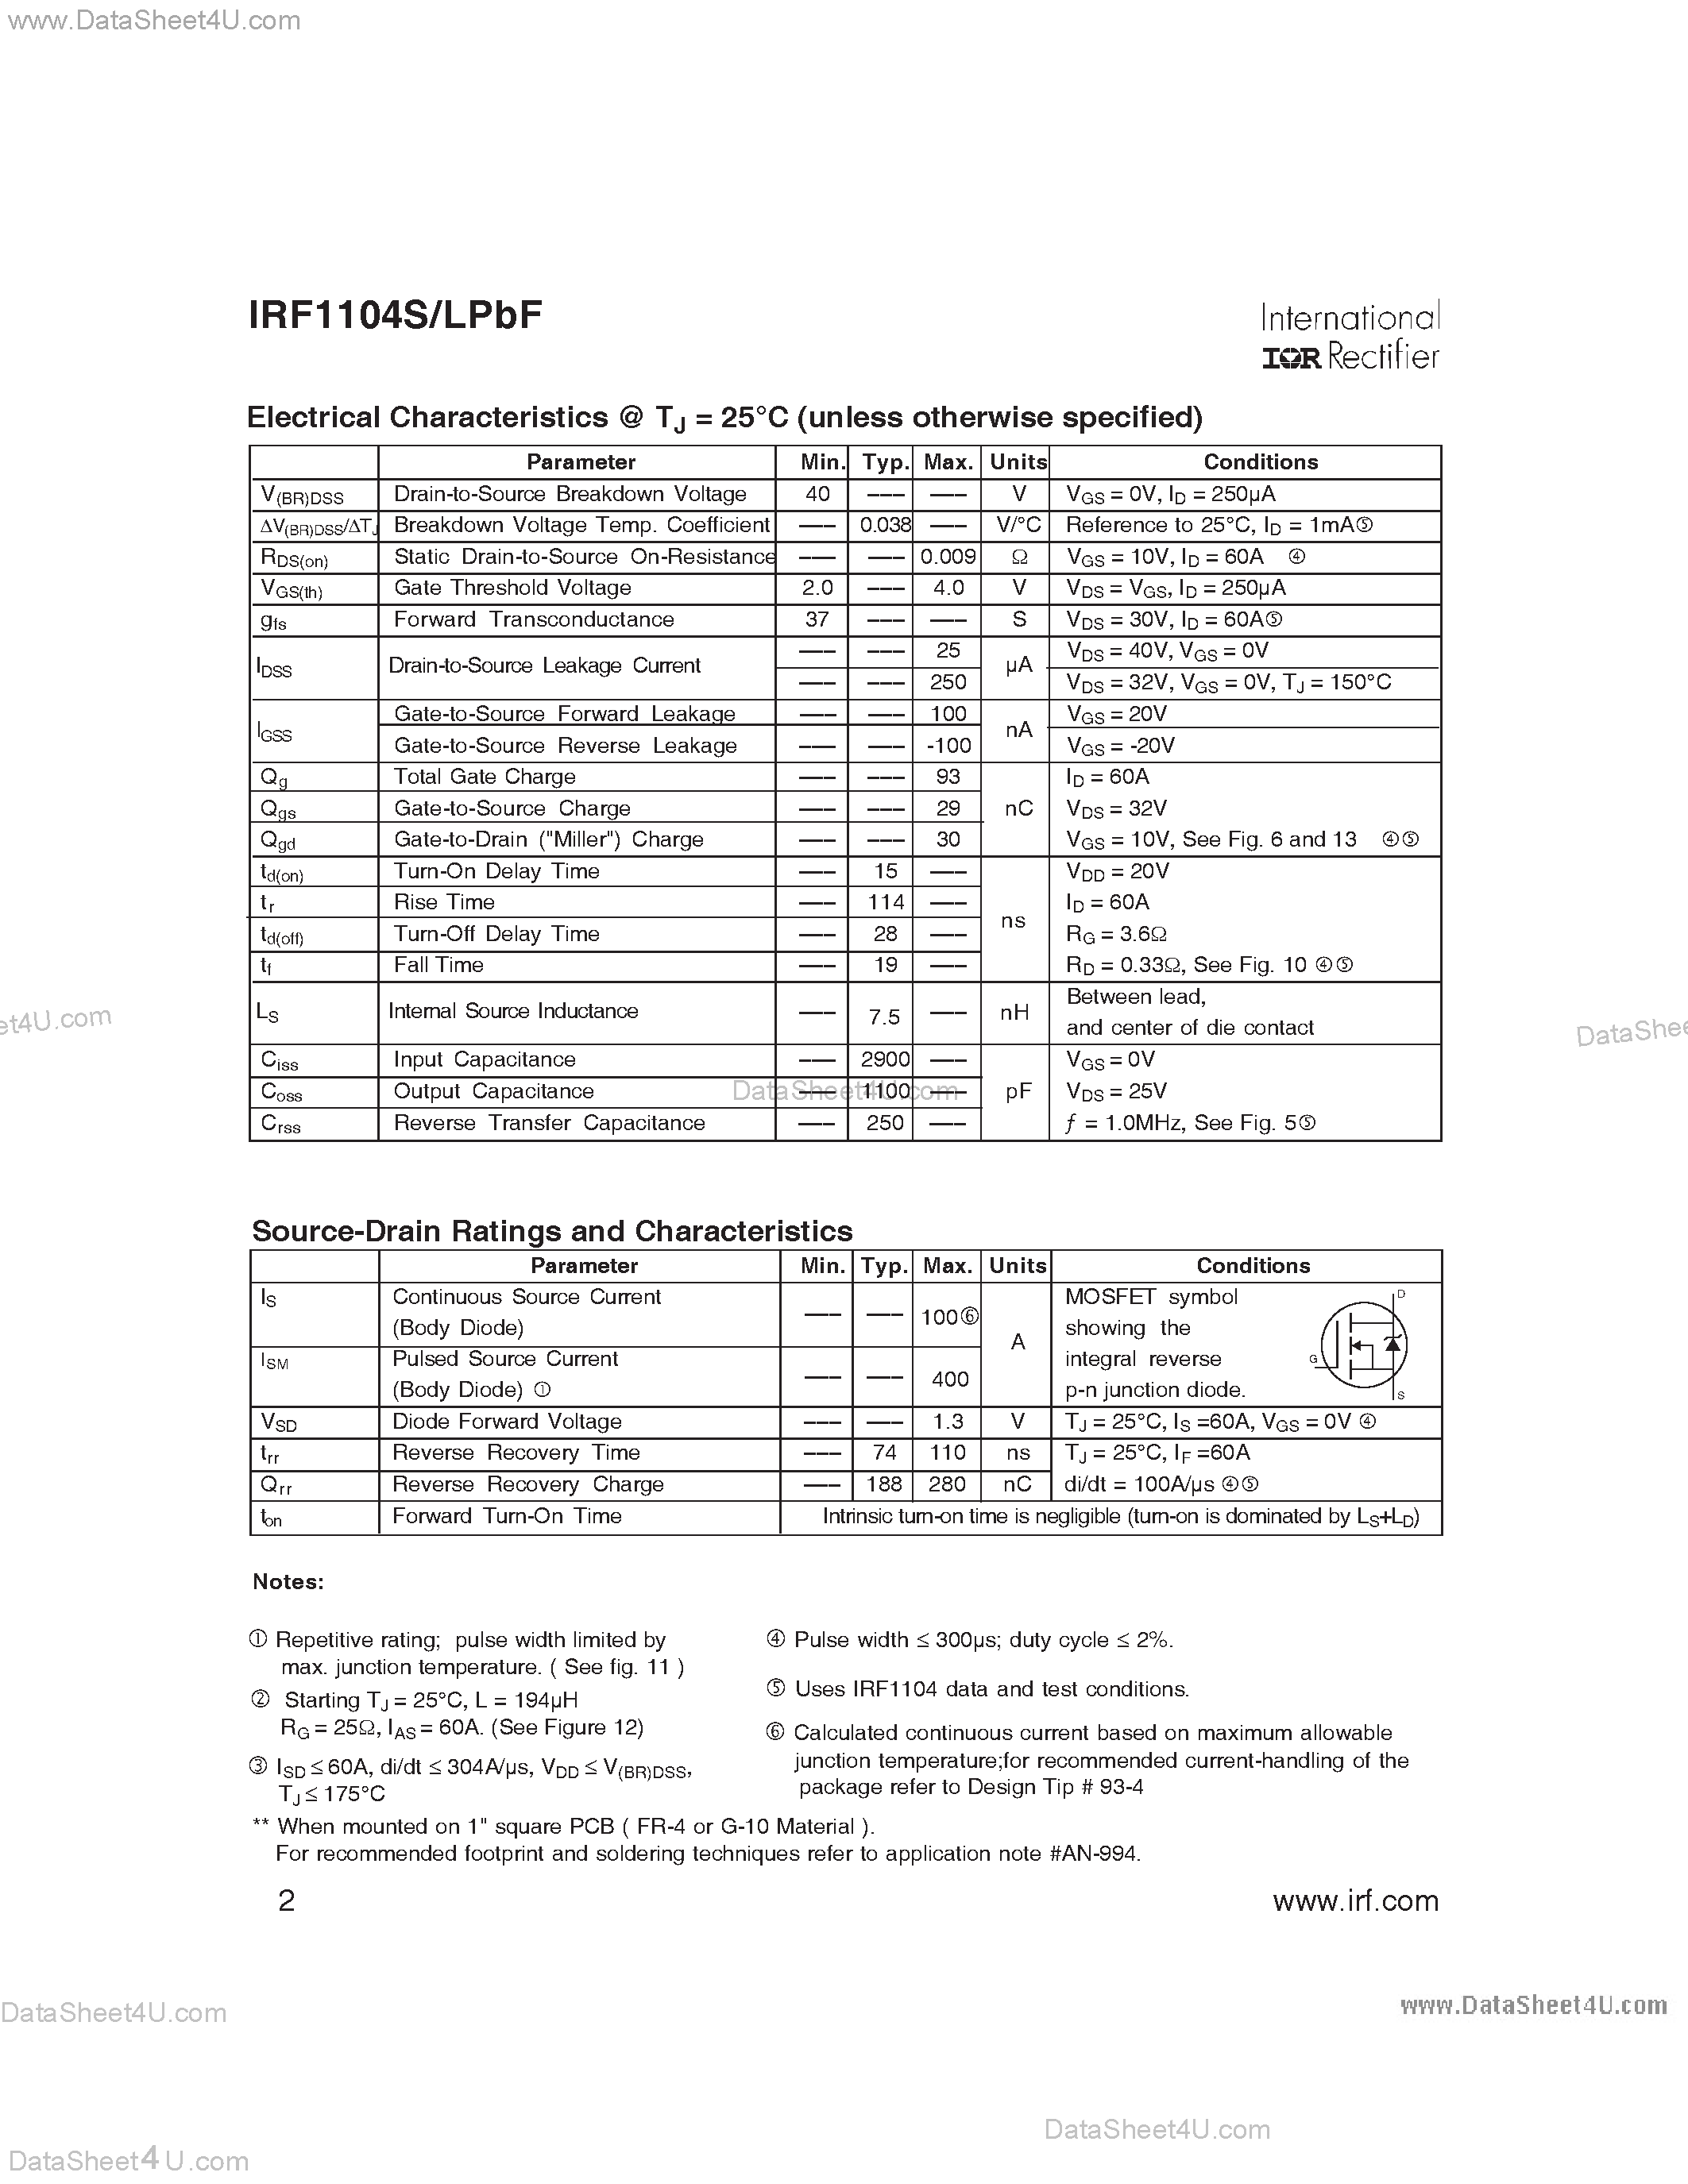 Datasheet IRF1104LPBF - (IRF1104S/LPBF) HEXFET Power MOSFET page 2